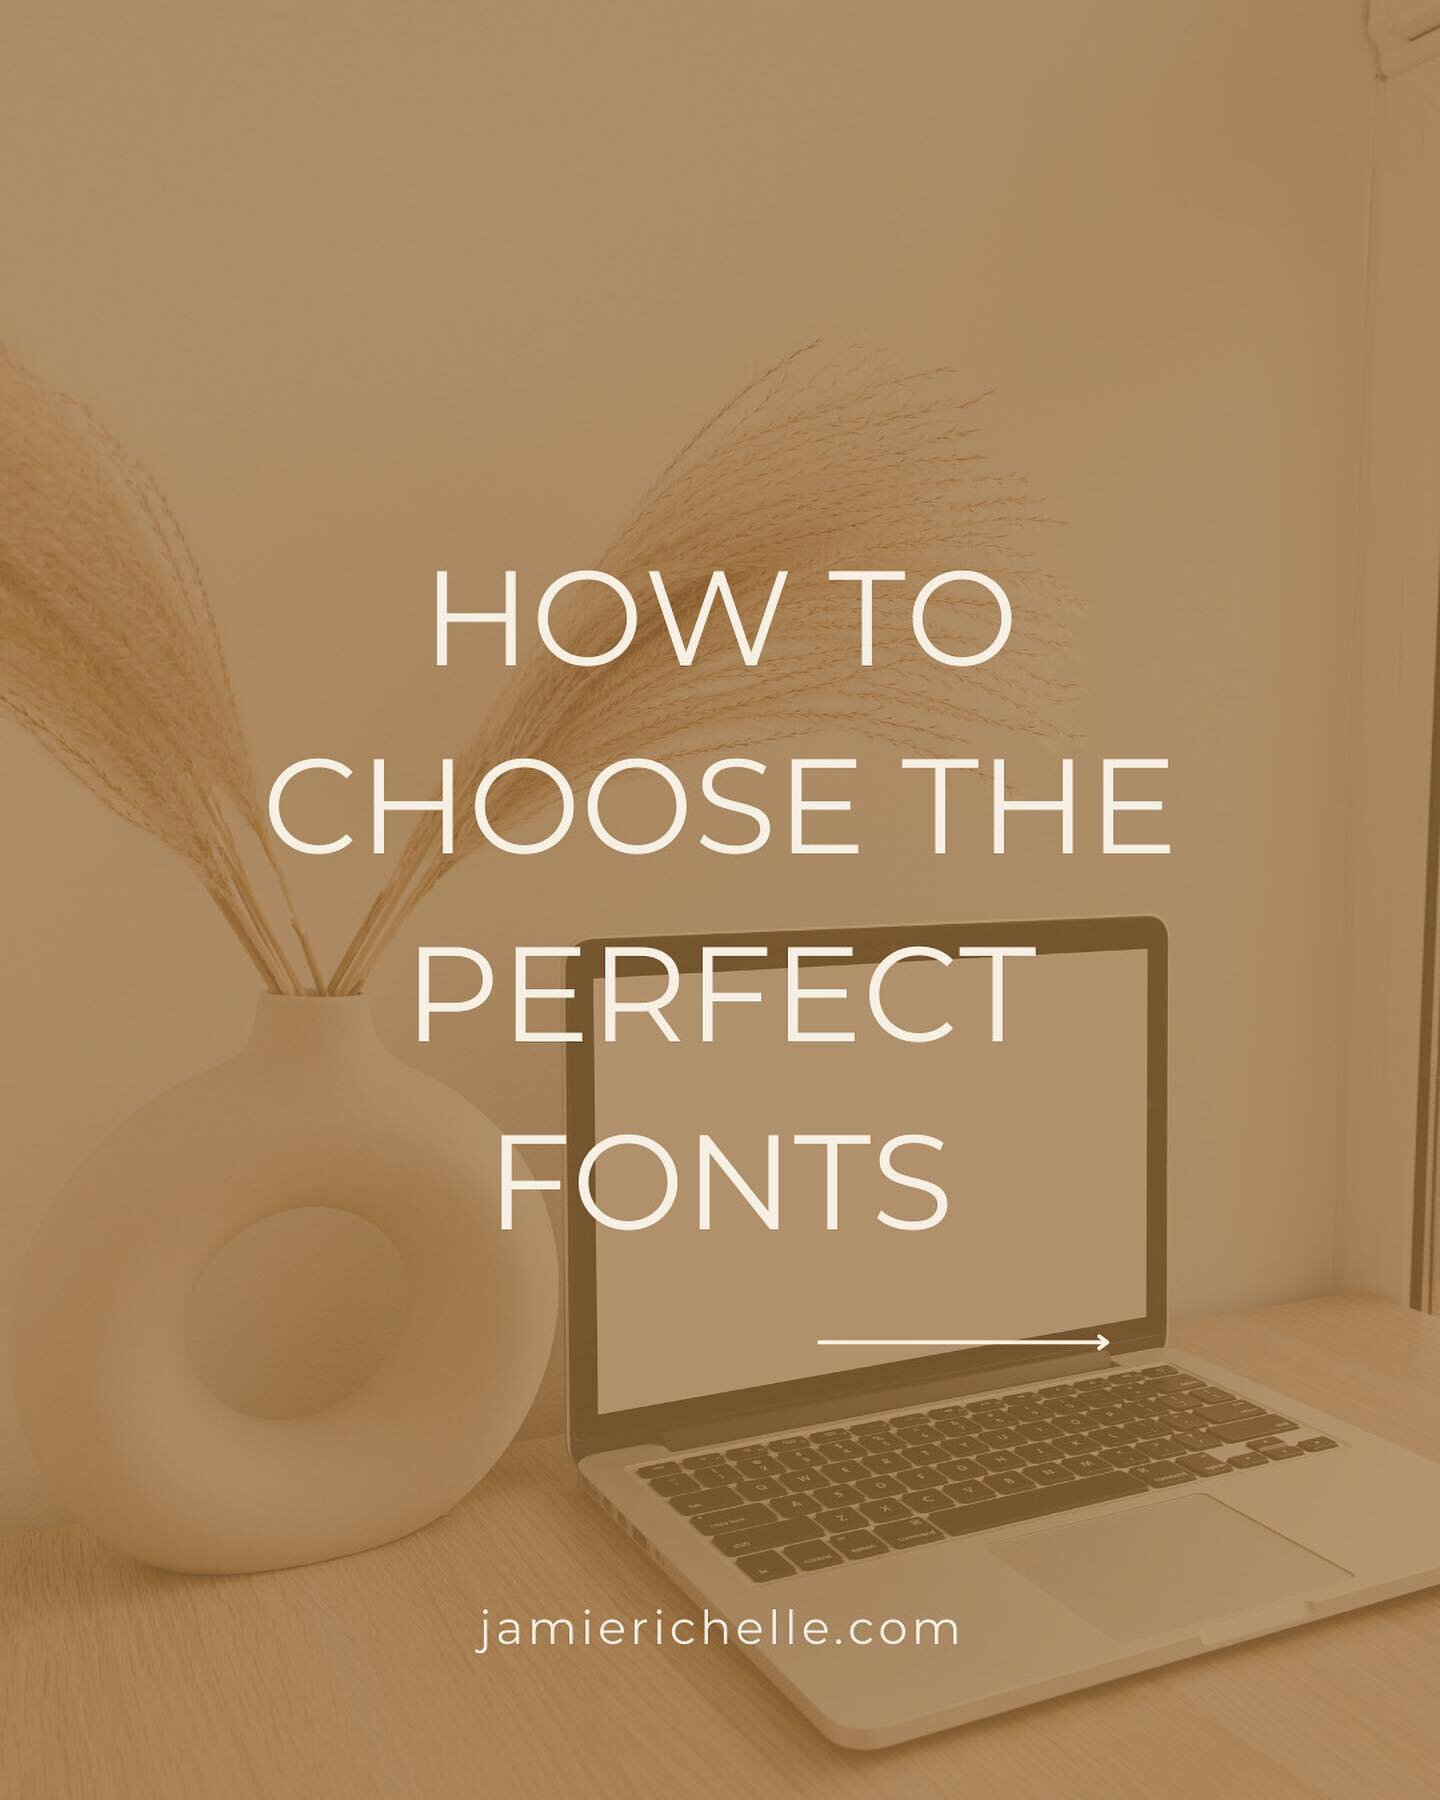 Choosing and styling fonts is something that I see messed up ALL THE TIME. Swipe for some simple tips!